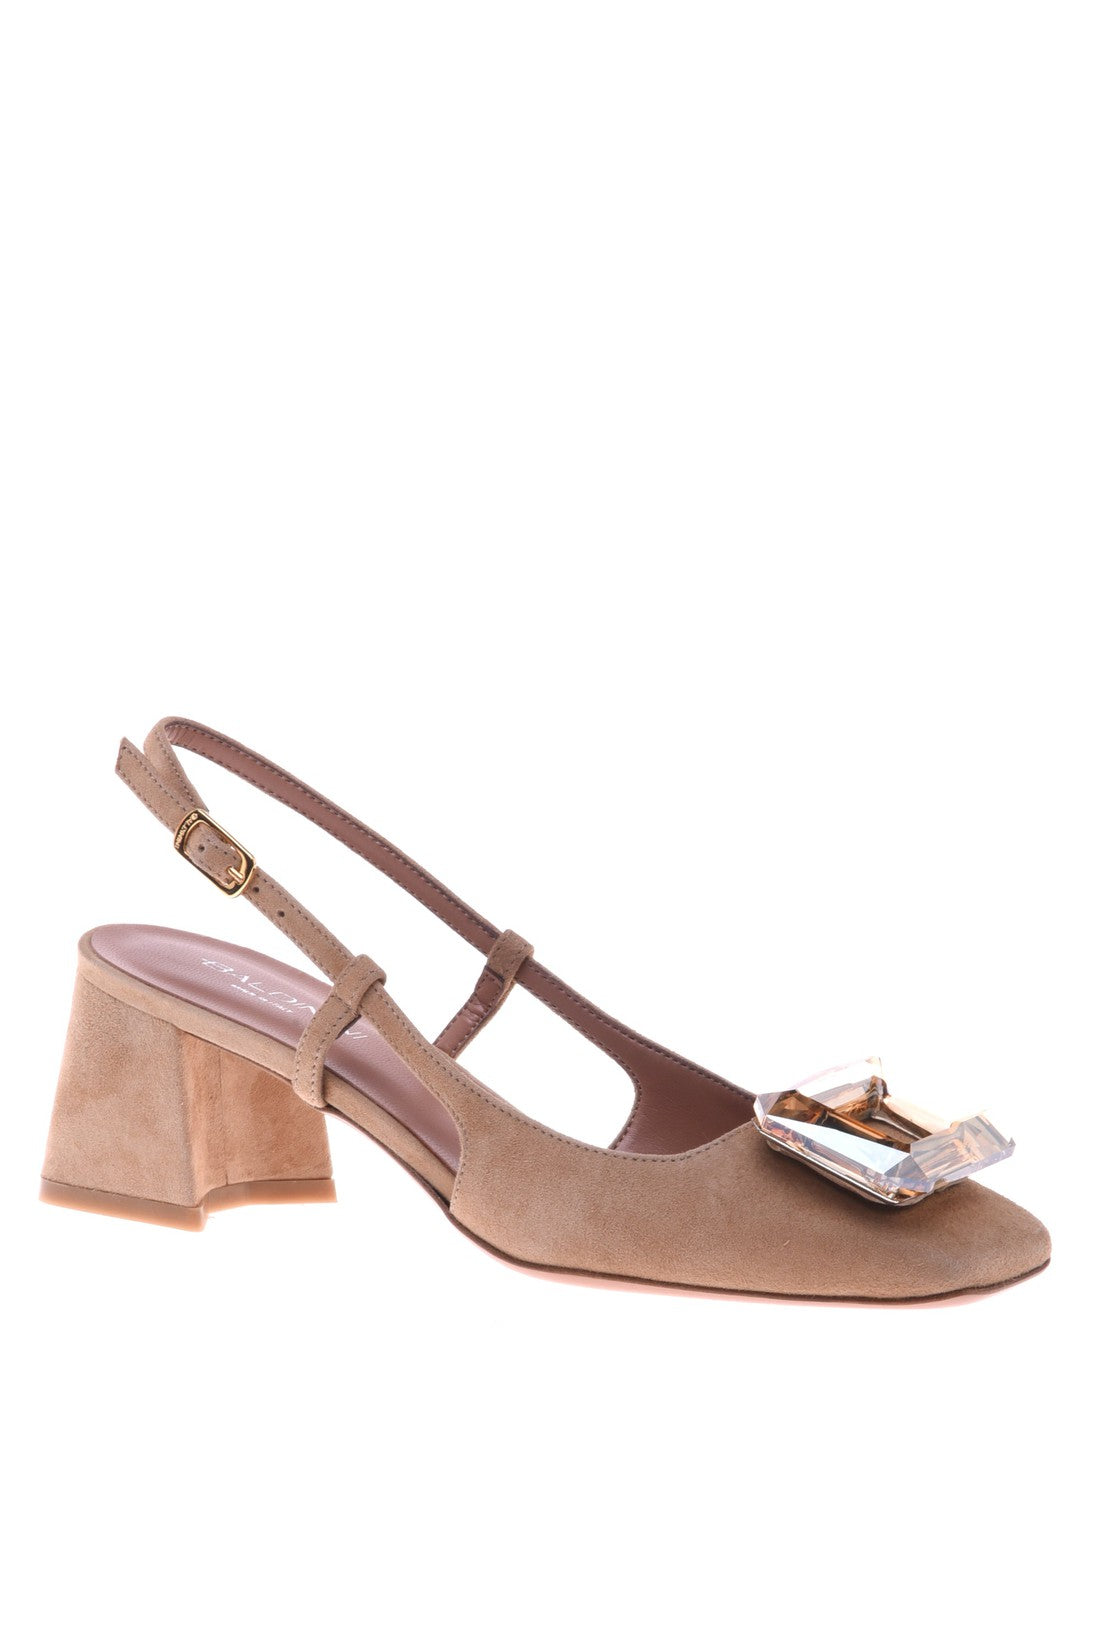 Slingbacks in taupe suede